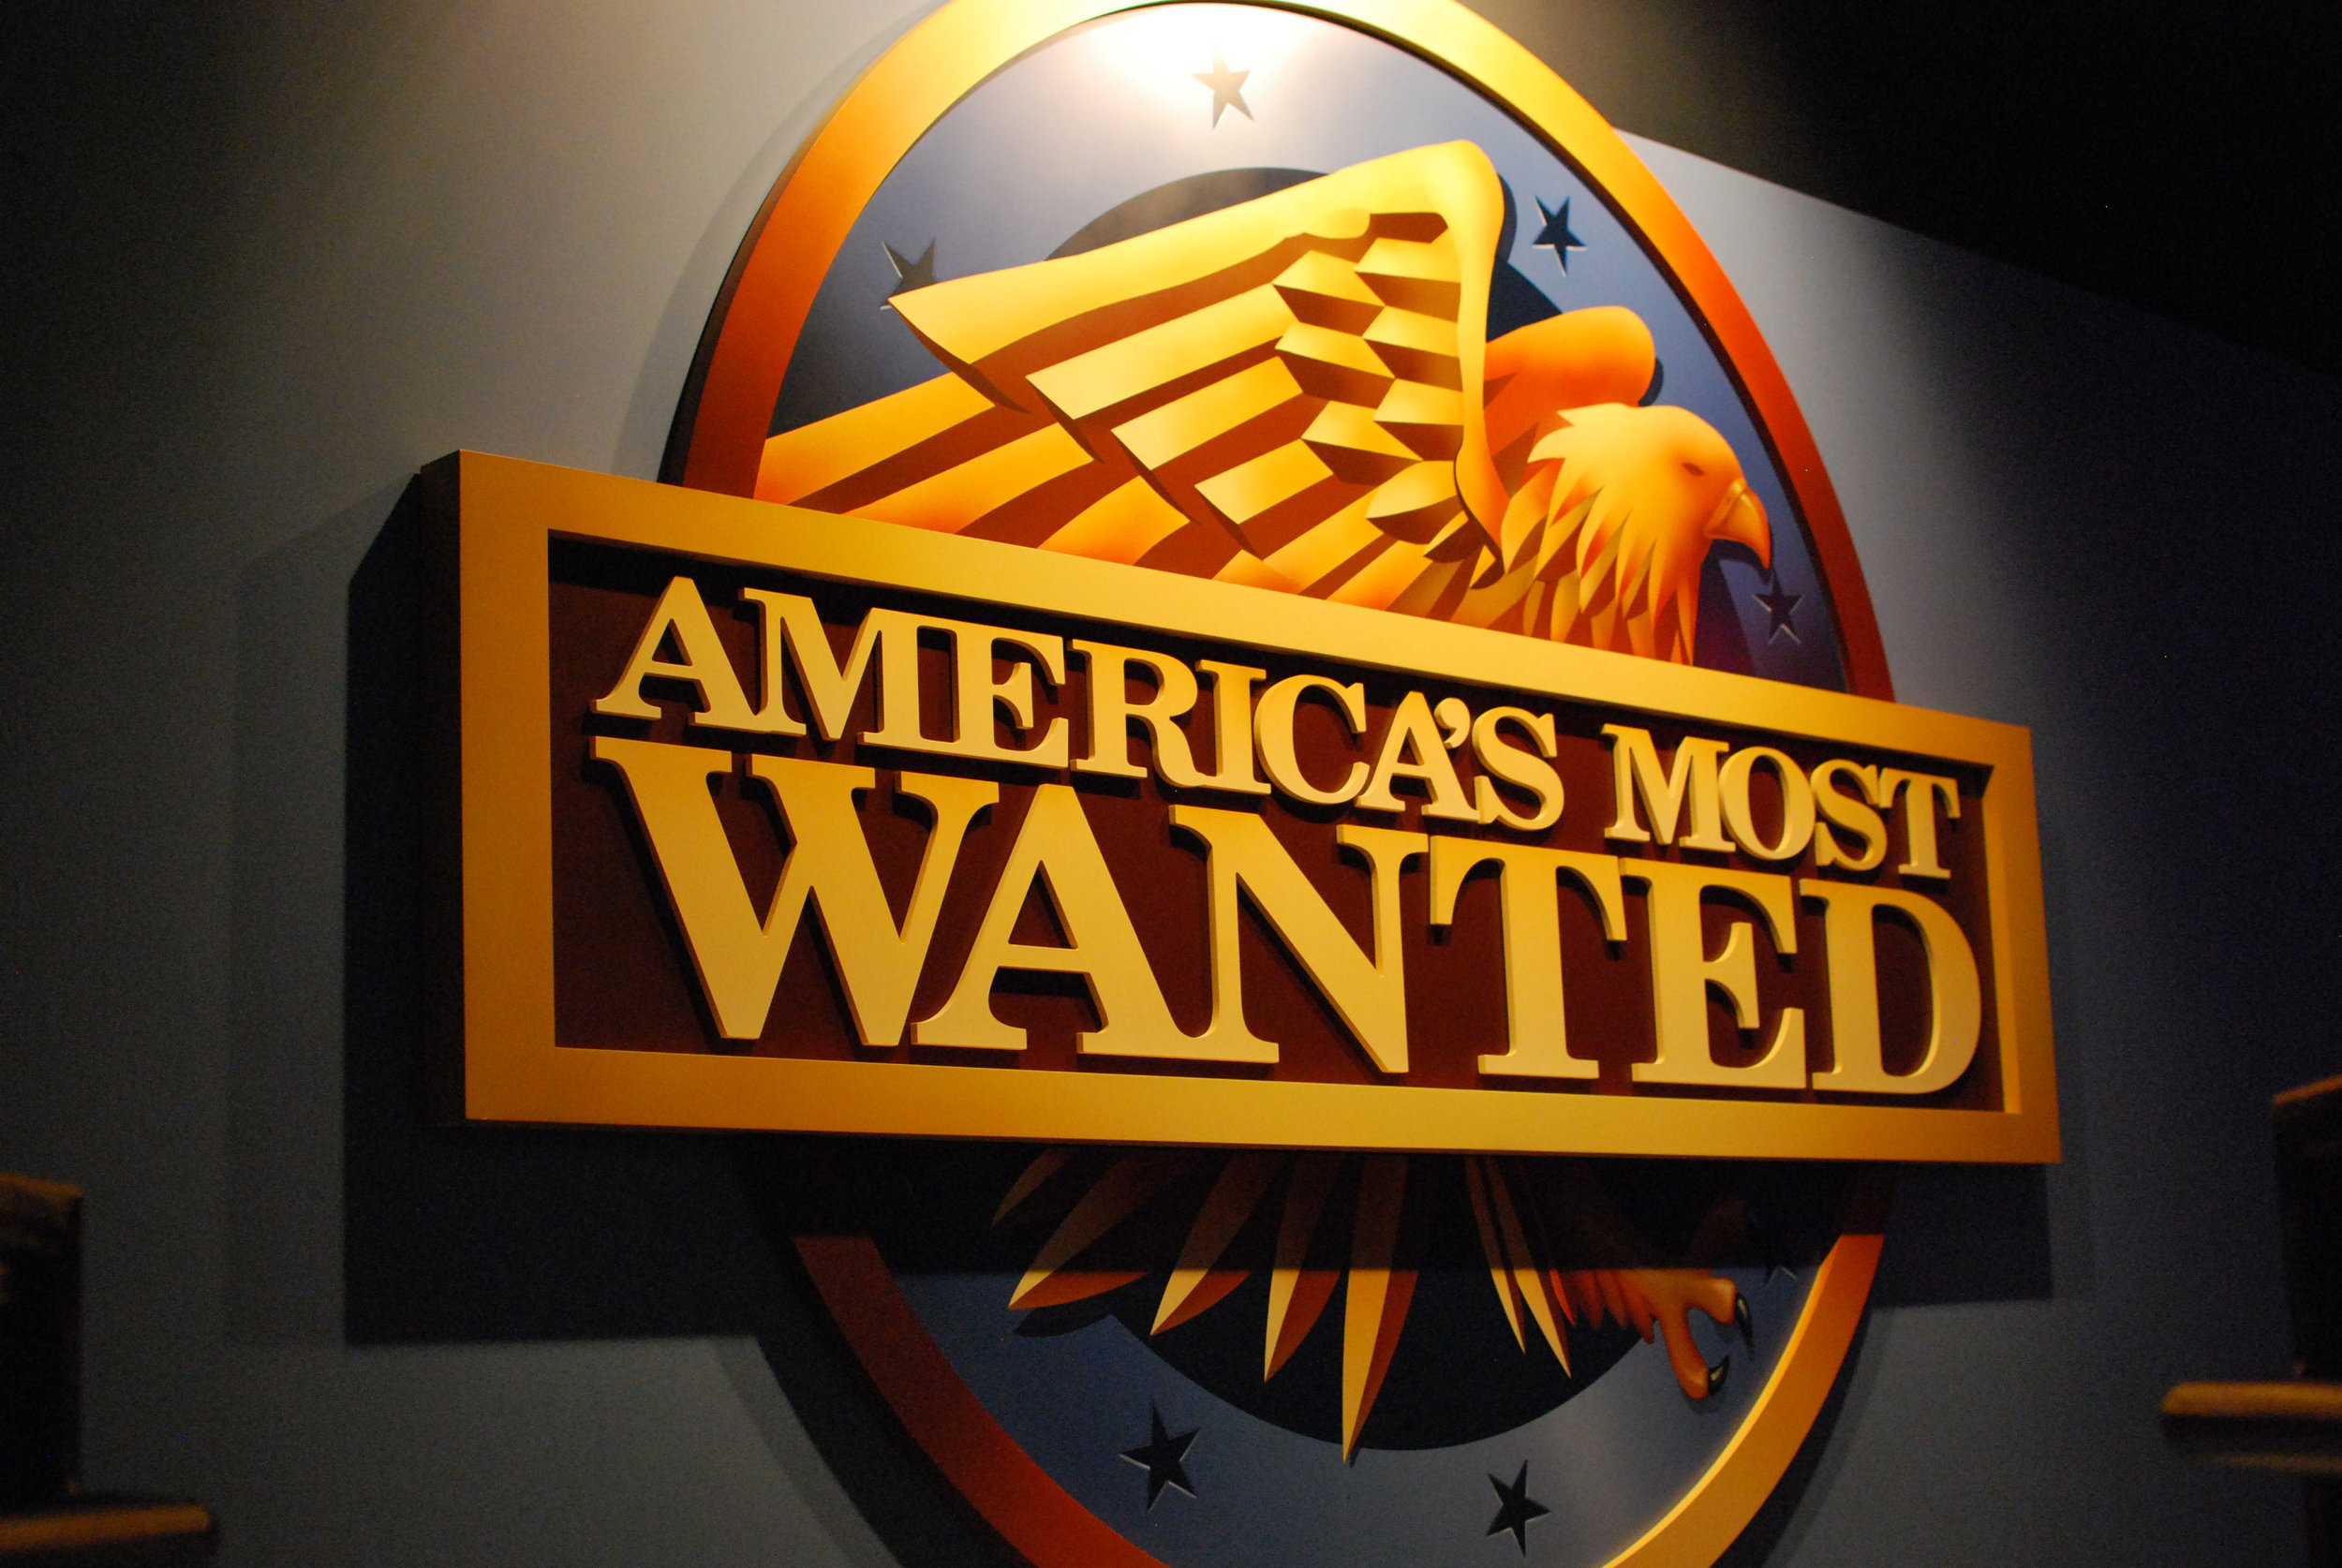 Logo_of_Americas_Most_Wanted_(11199507225).jpg